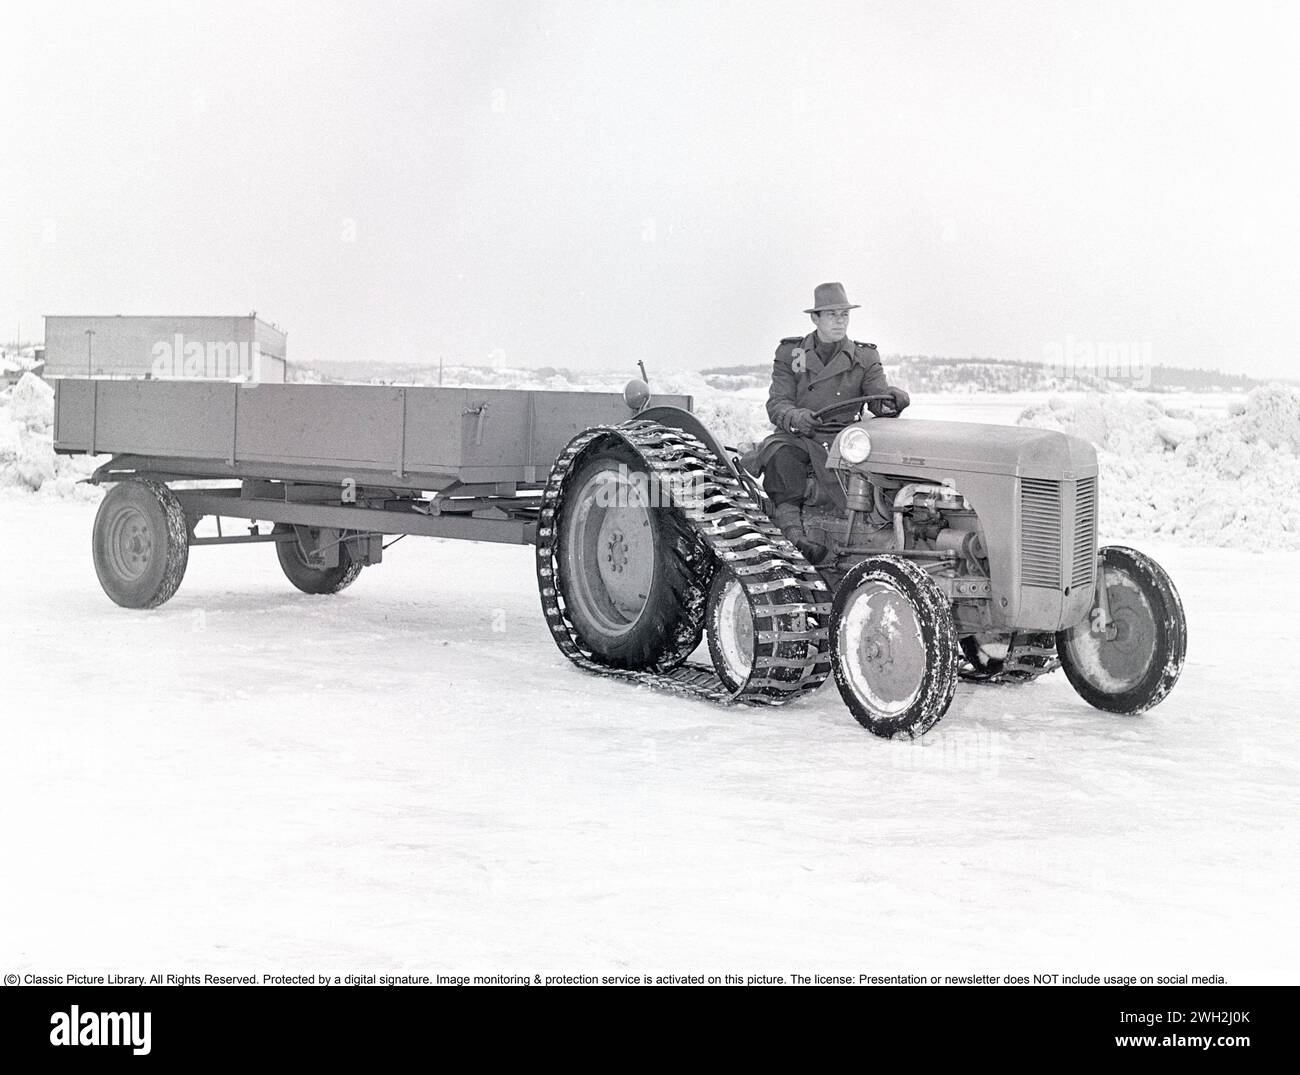 Ferguson tractor in the 1950s. A driver on the iconic Ferguson tractor featured with caterpillar bands and a one-axled wagon behind. The Ferguson tractors were the first modern agricultural tractors and its three poinkt linkage system was a major development.   1951. Kristoffersson ref BB46-4 Stock Photo